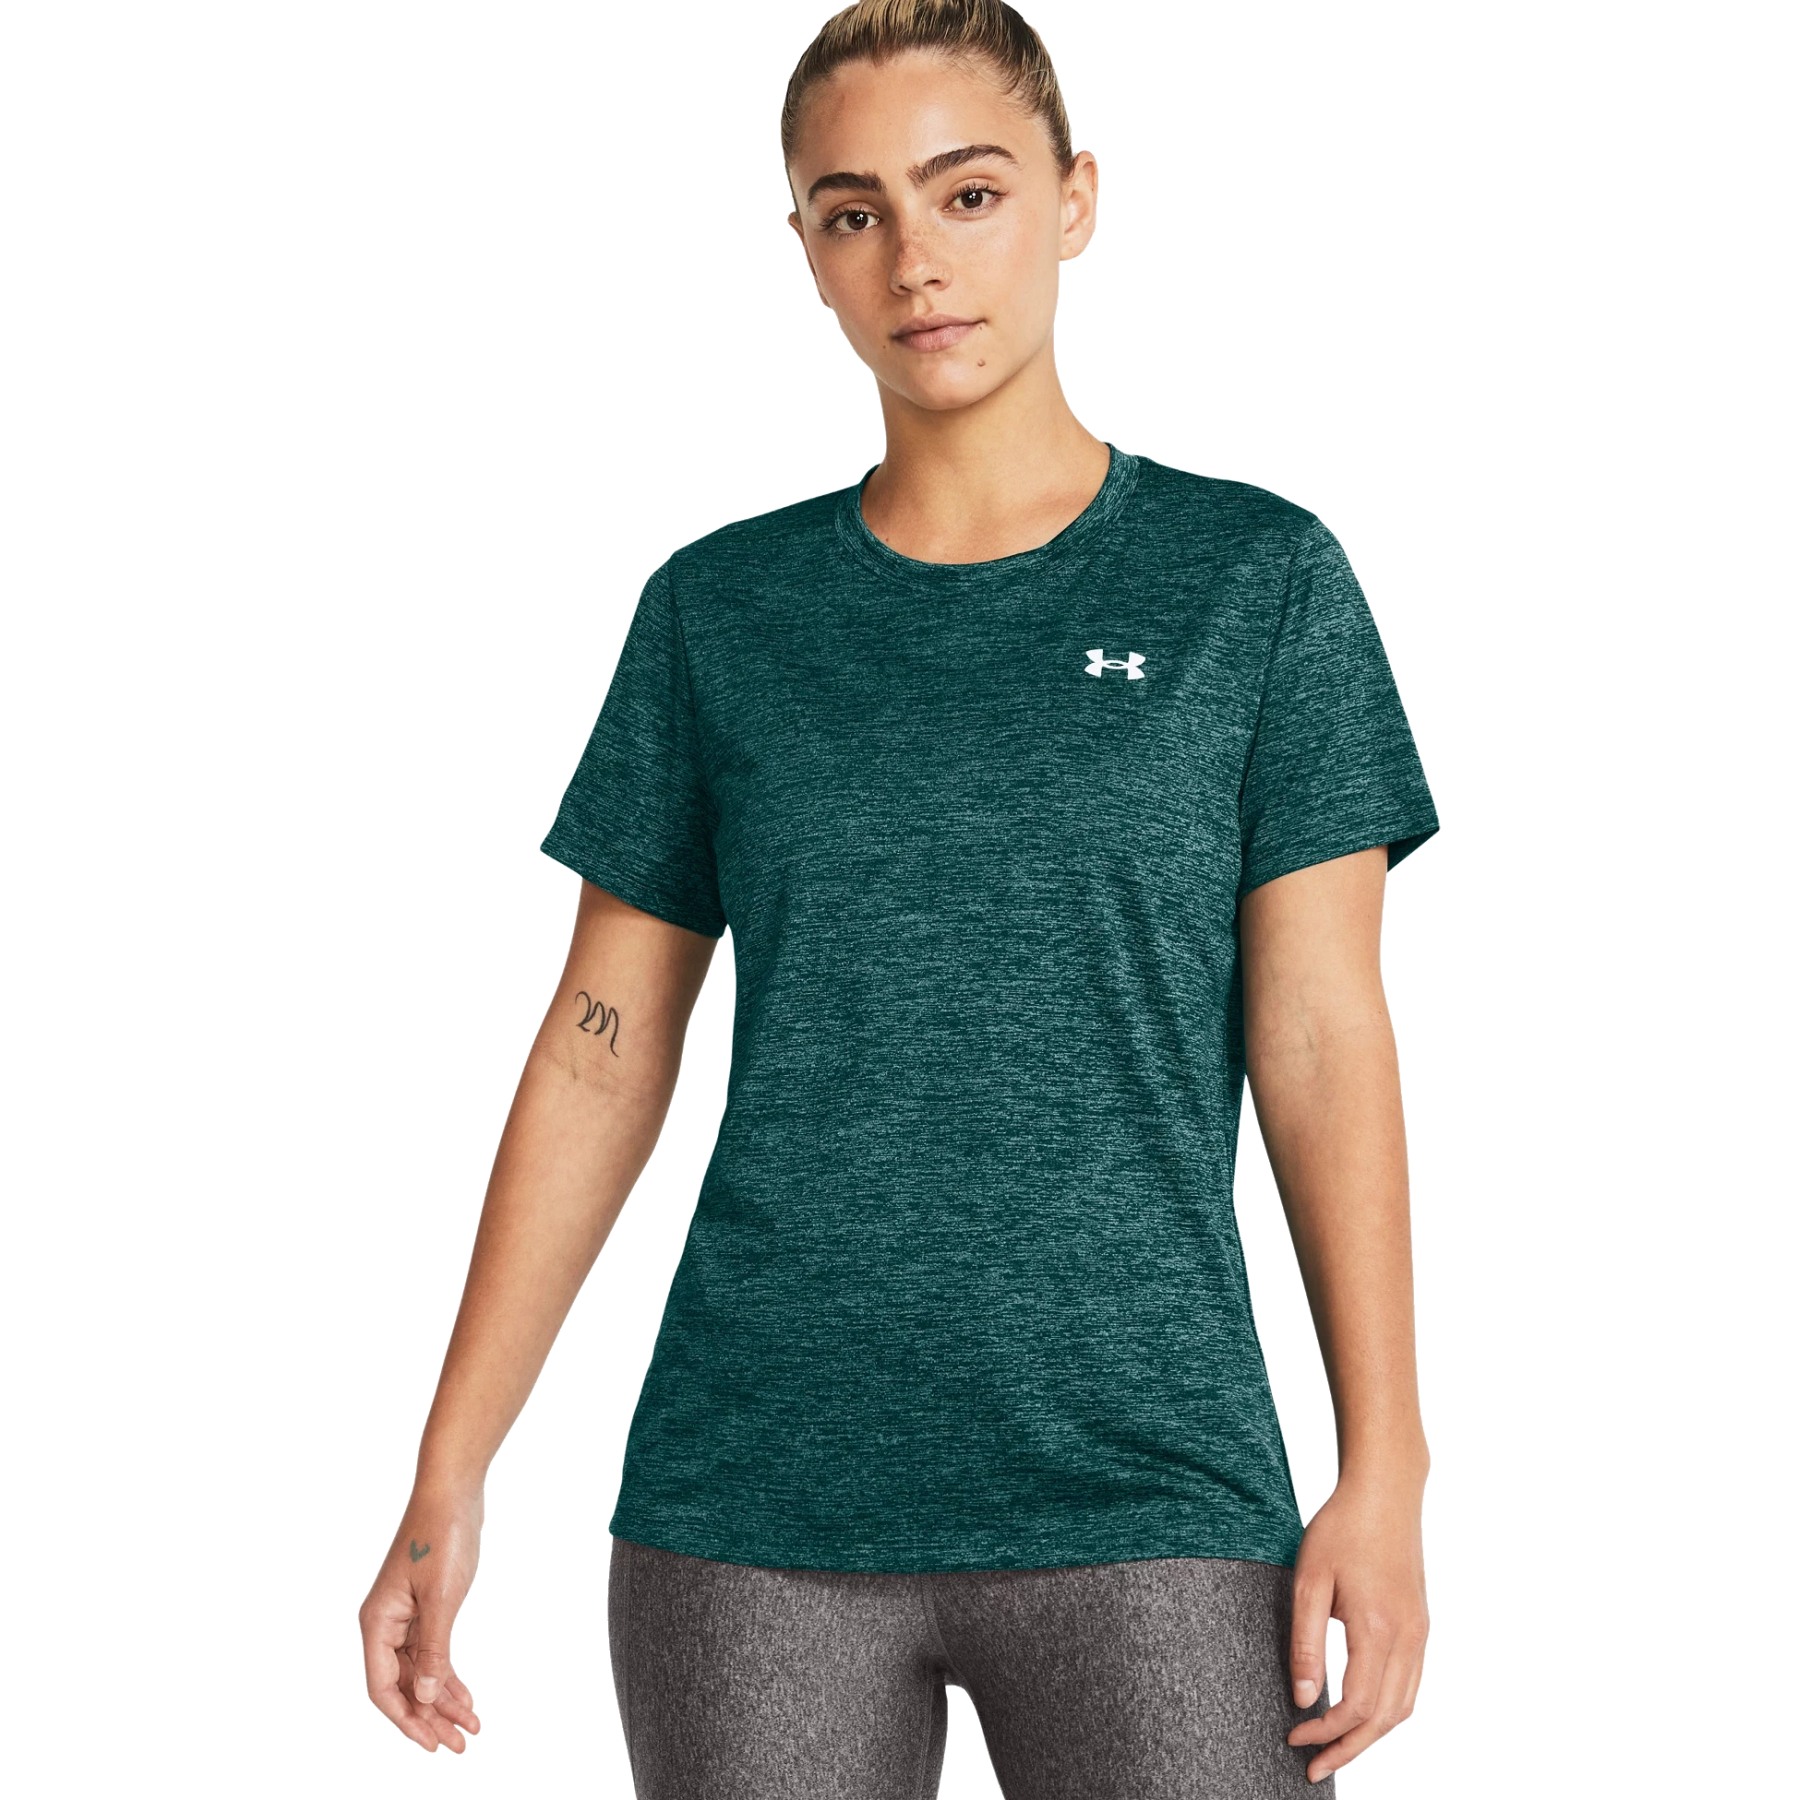 Picture of Under Armour UA Tech™ Twist Short Sleeve Shirt Women - Hydro Teal/Coastal Teal/White